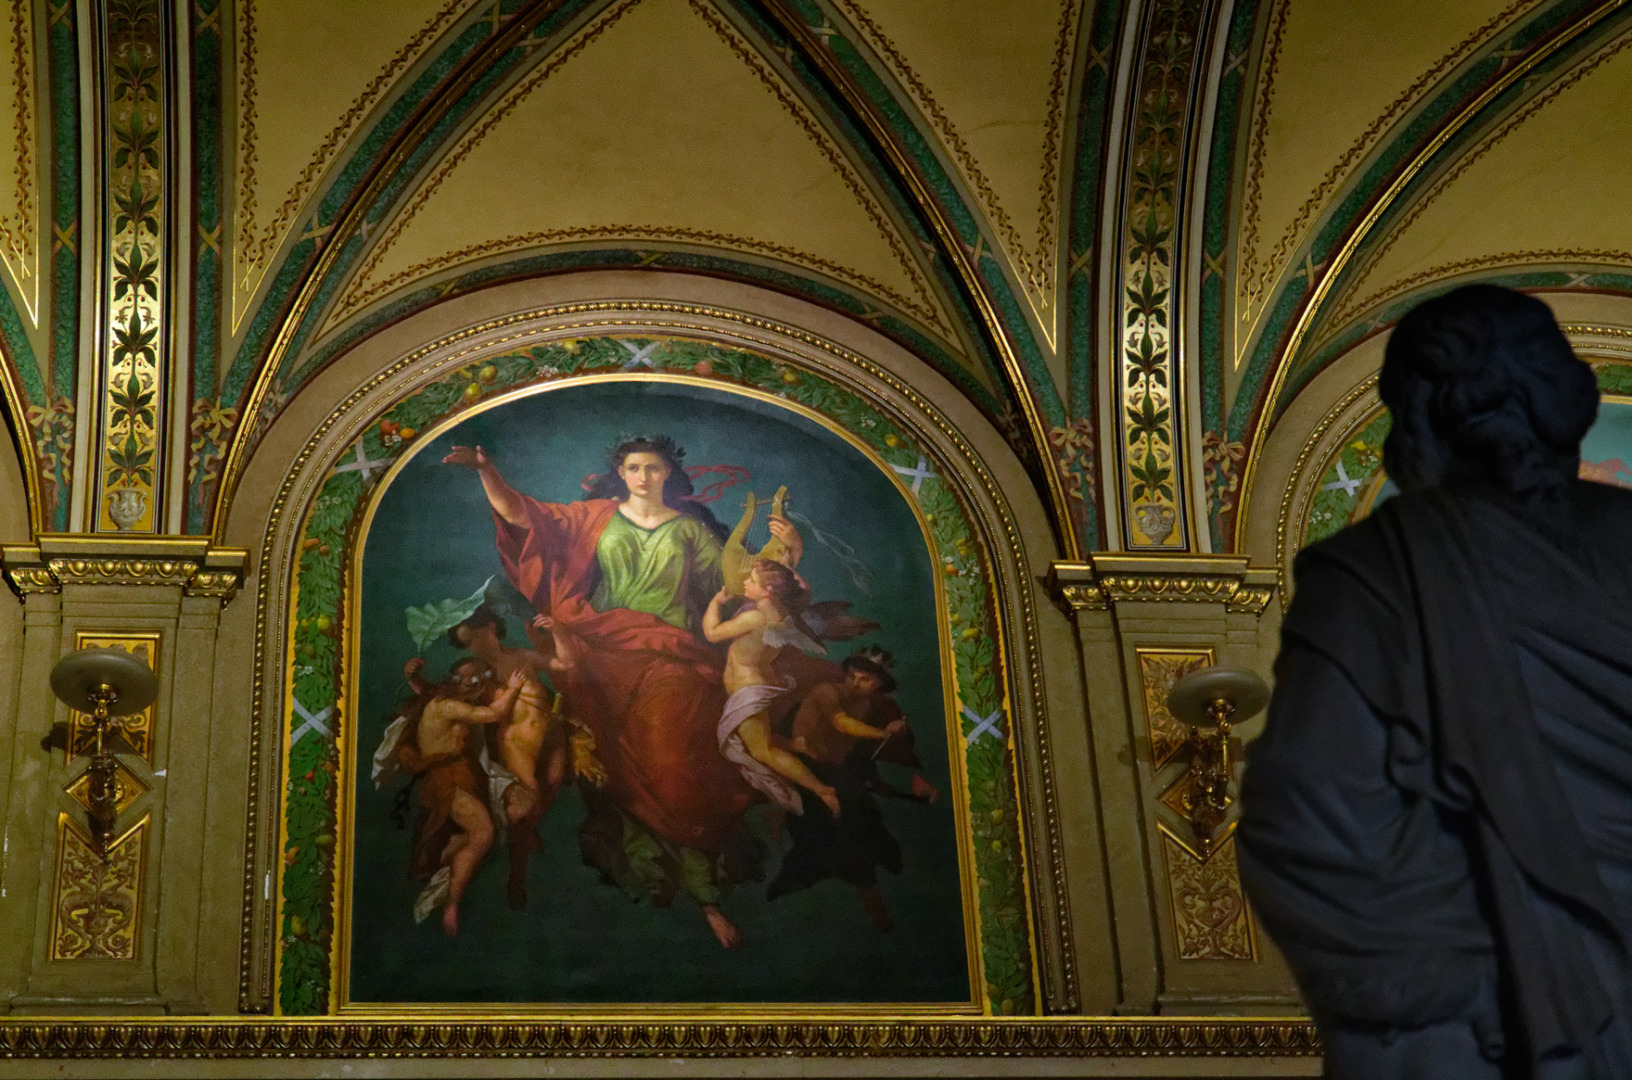 An allegorical lunette along the Grand Staircase. f/6.4, 1/80, ISO 1600, 70mm